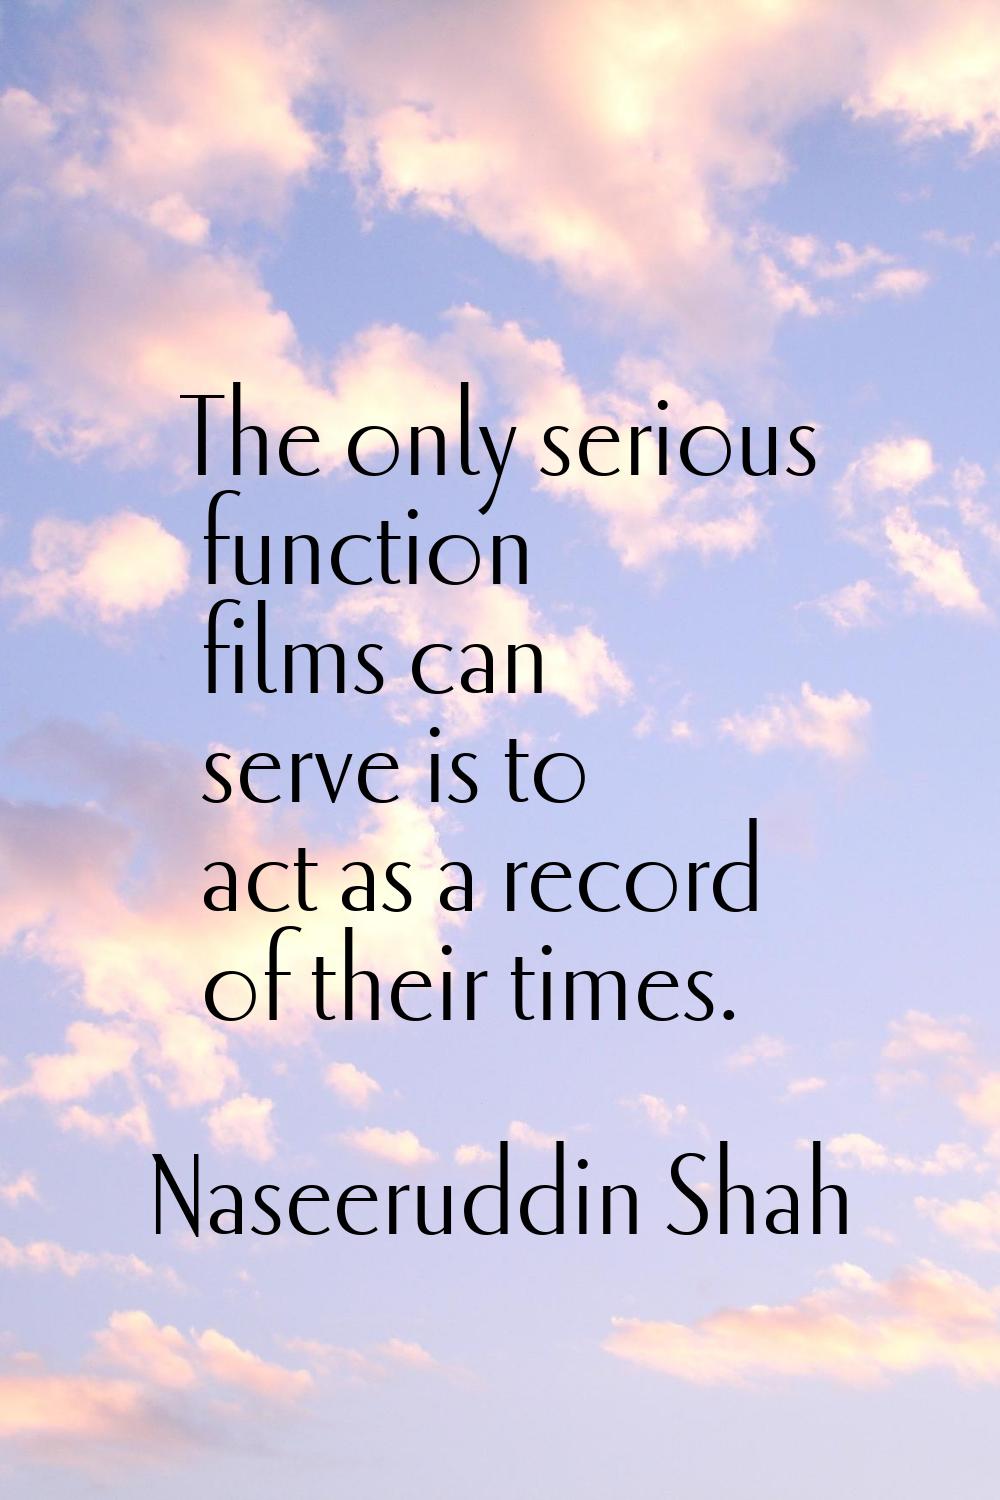 The only serious function films can serve is to act as a record of their times.